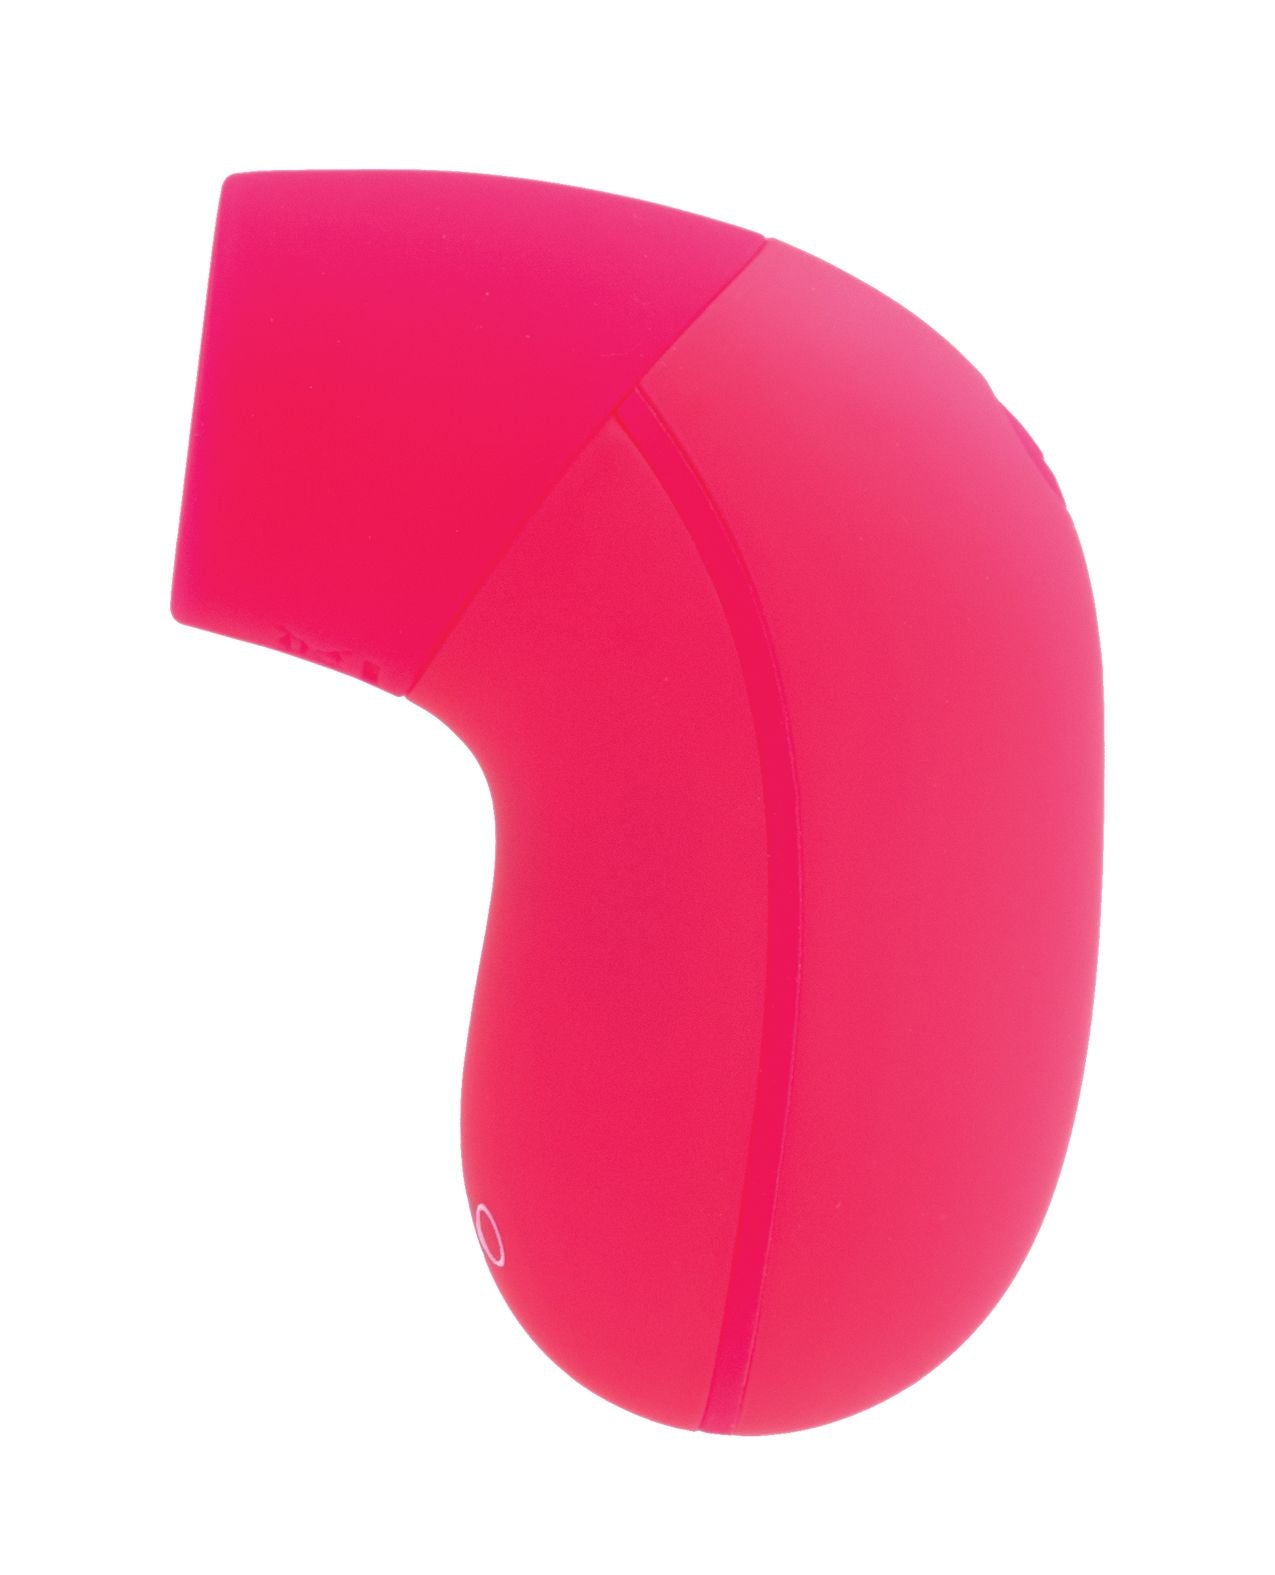 Side view of the sonic wave toy to show its ergonomic shape (pink).